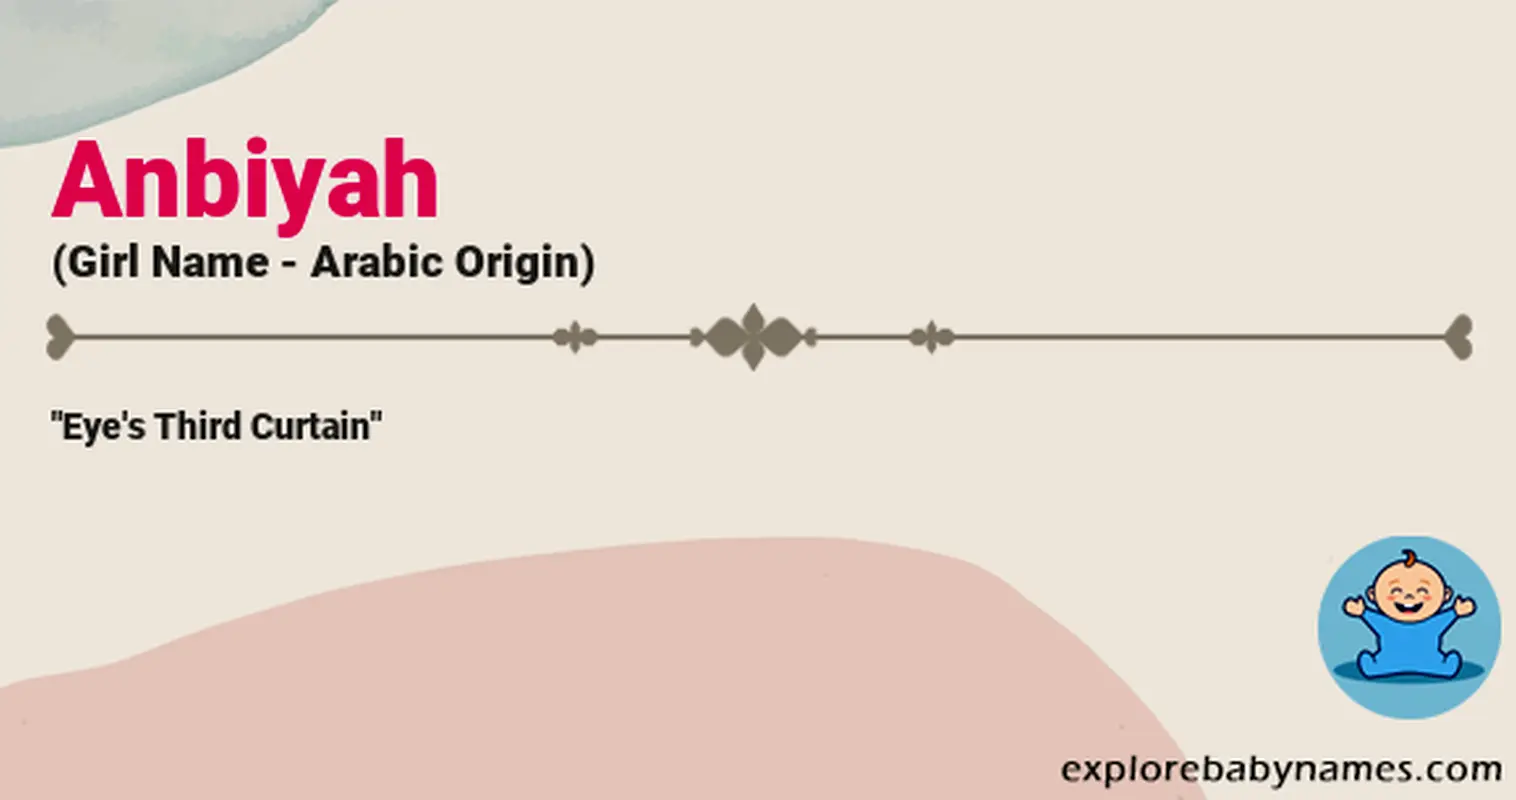 Meaning of Anbiyah